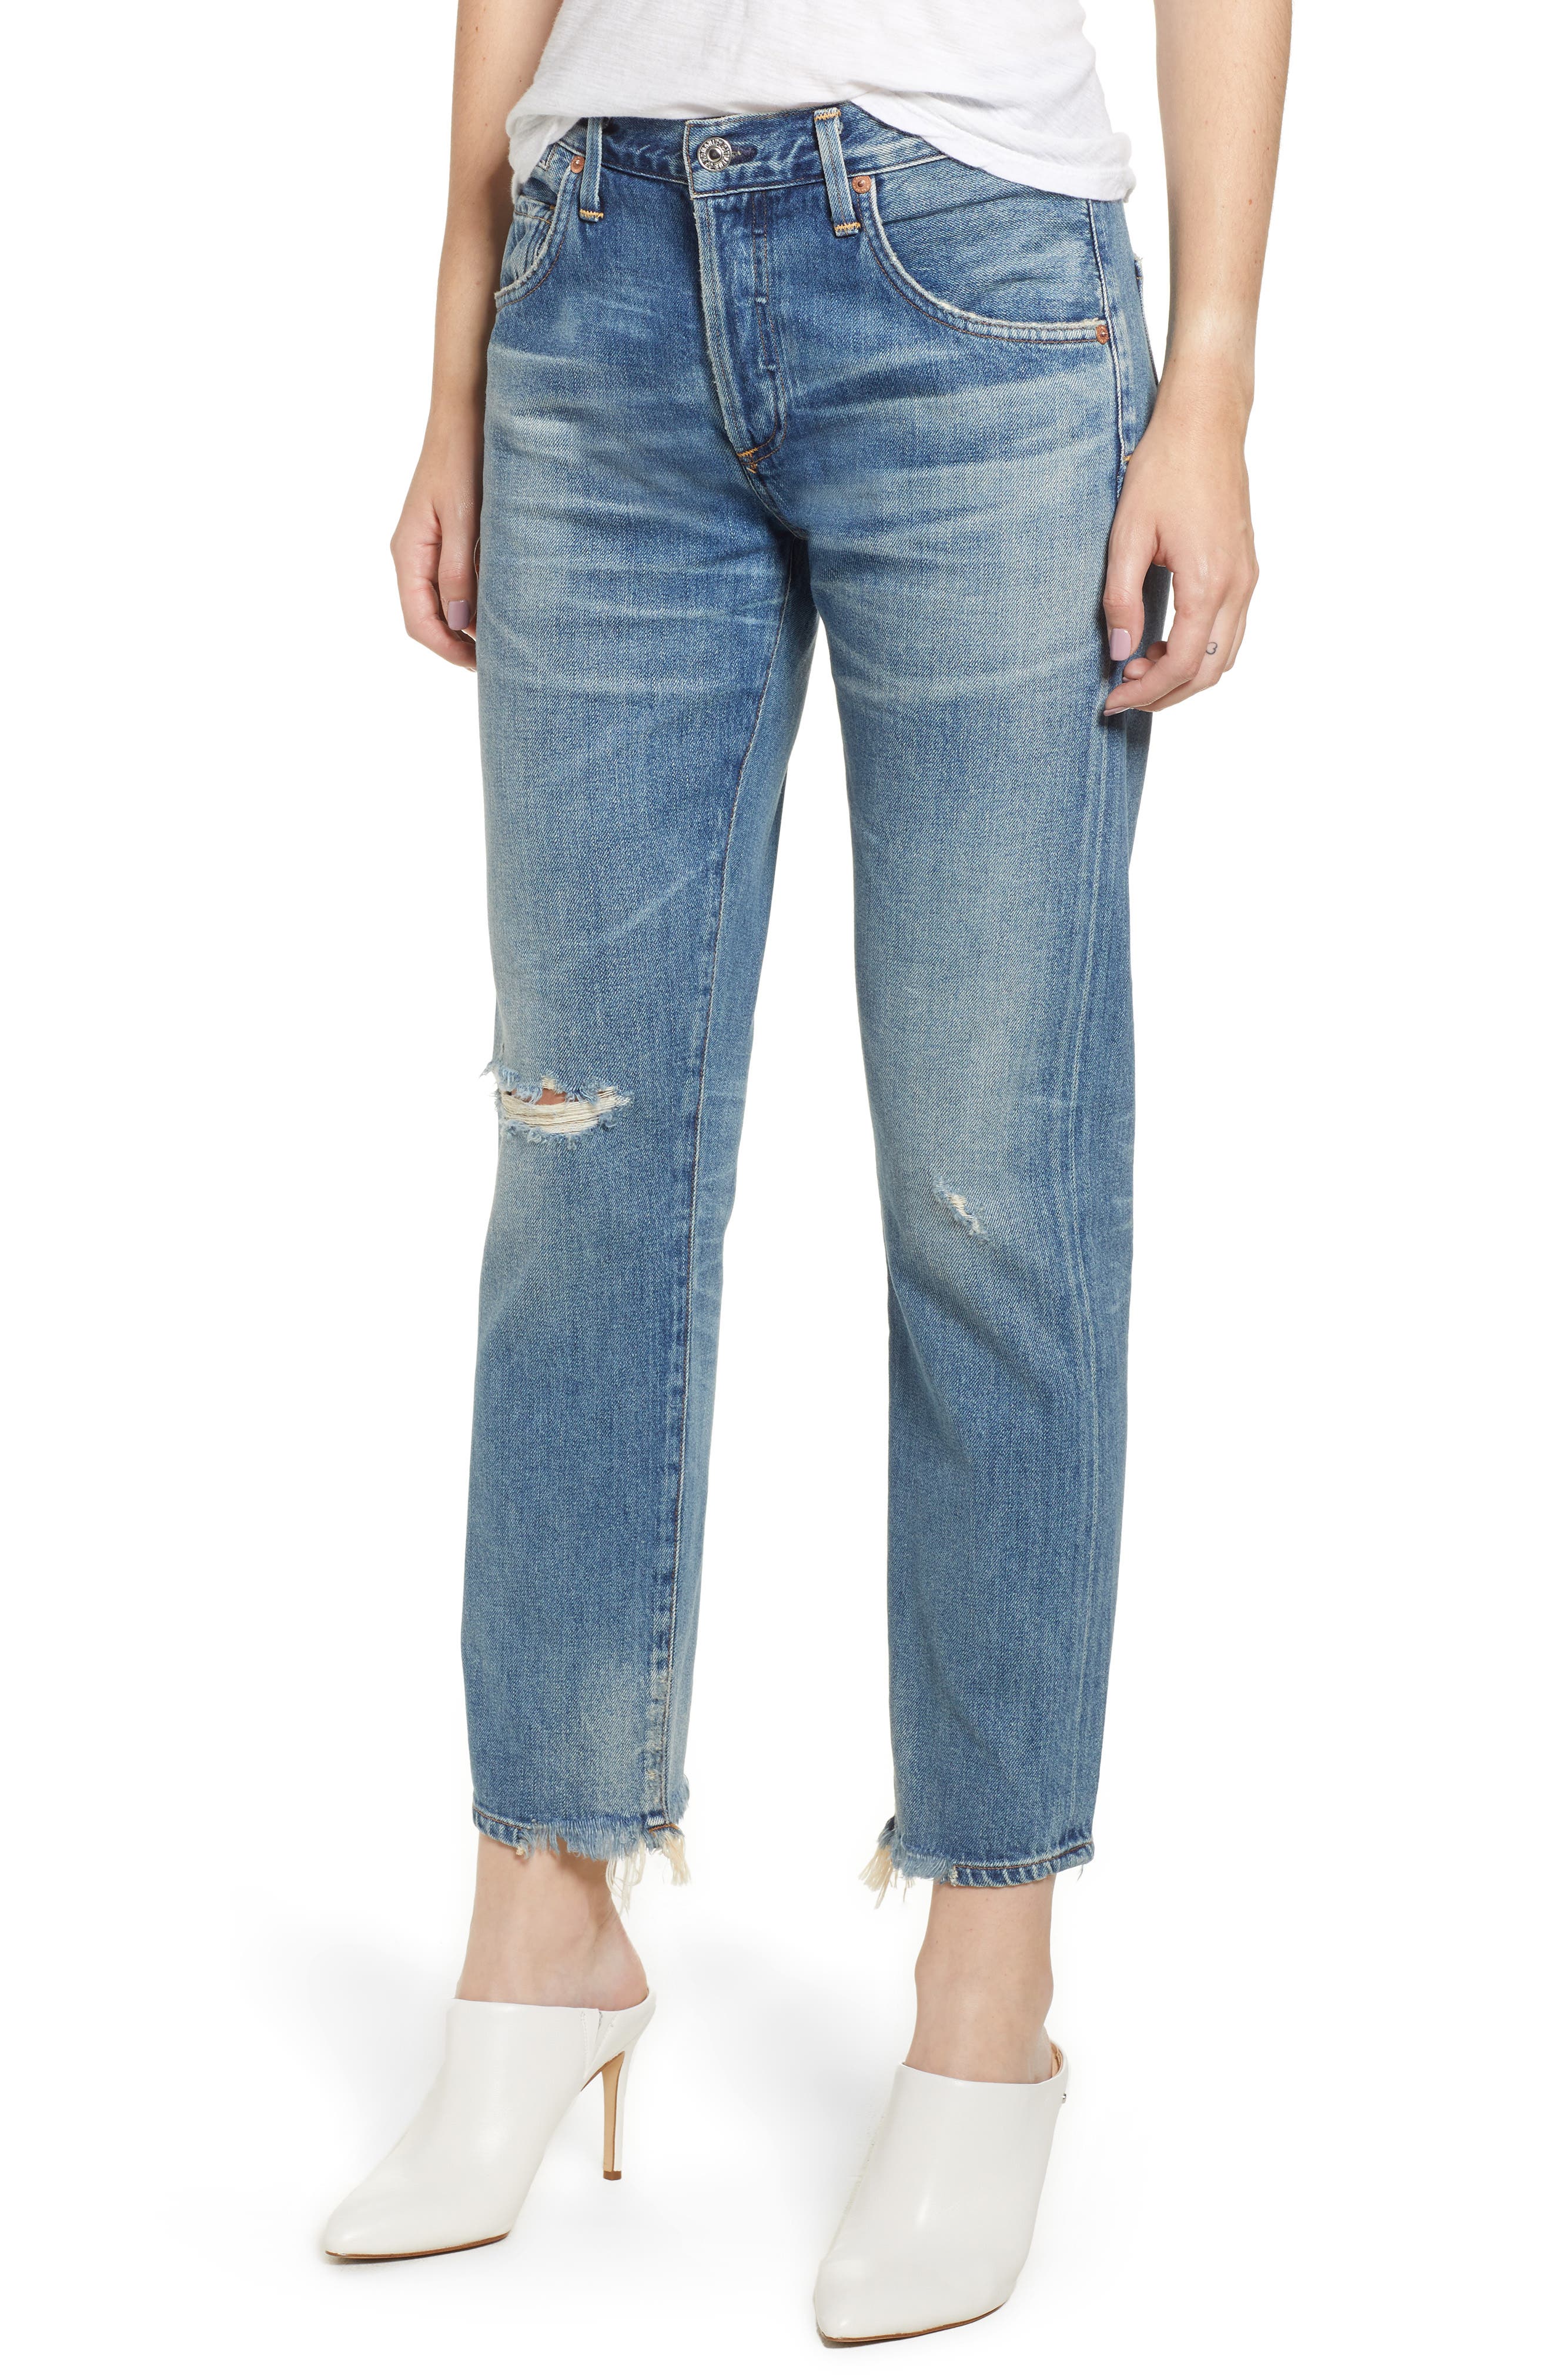 citizens of humanity emerson jeans